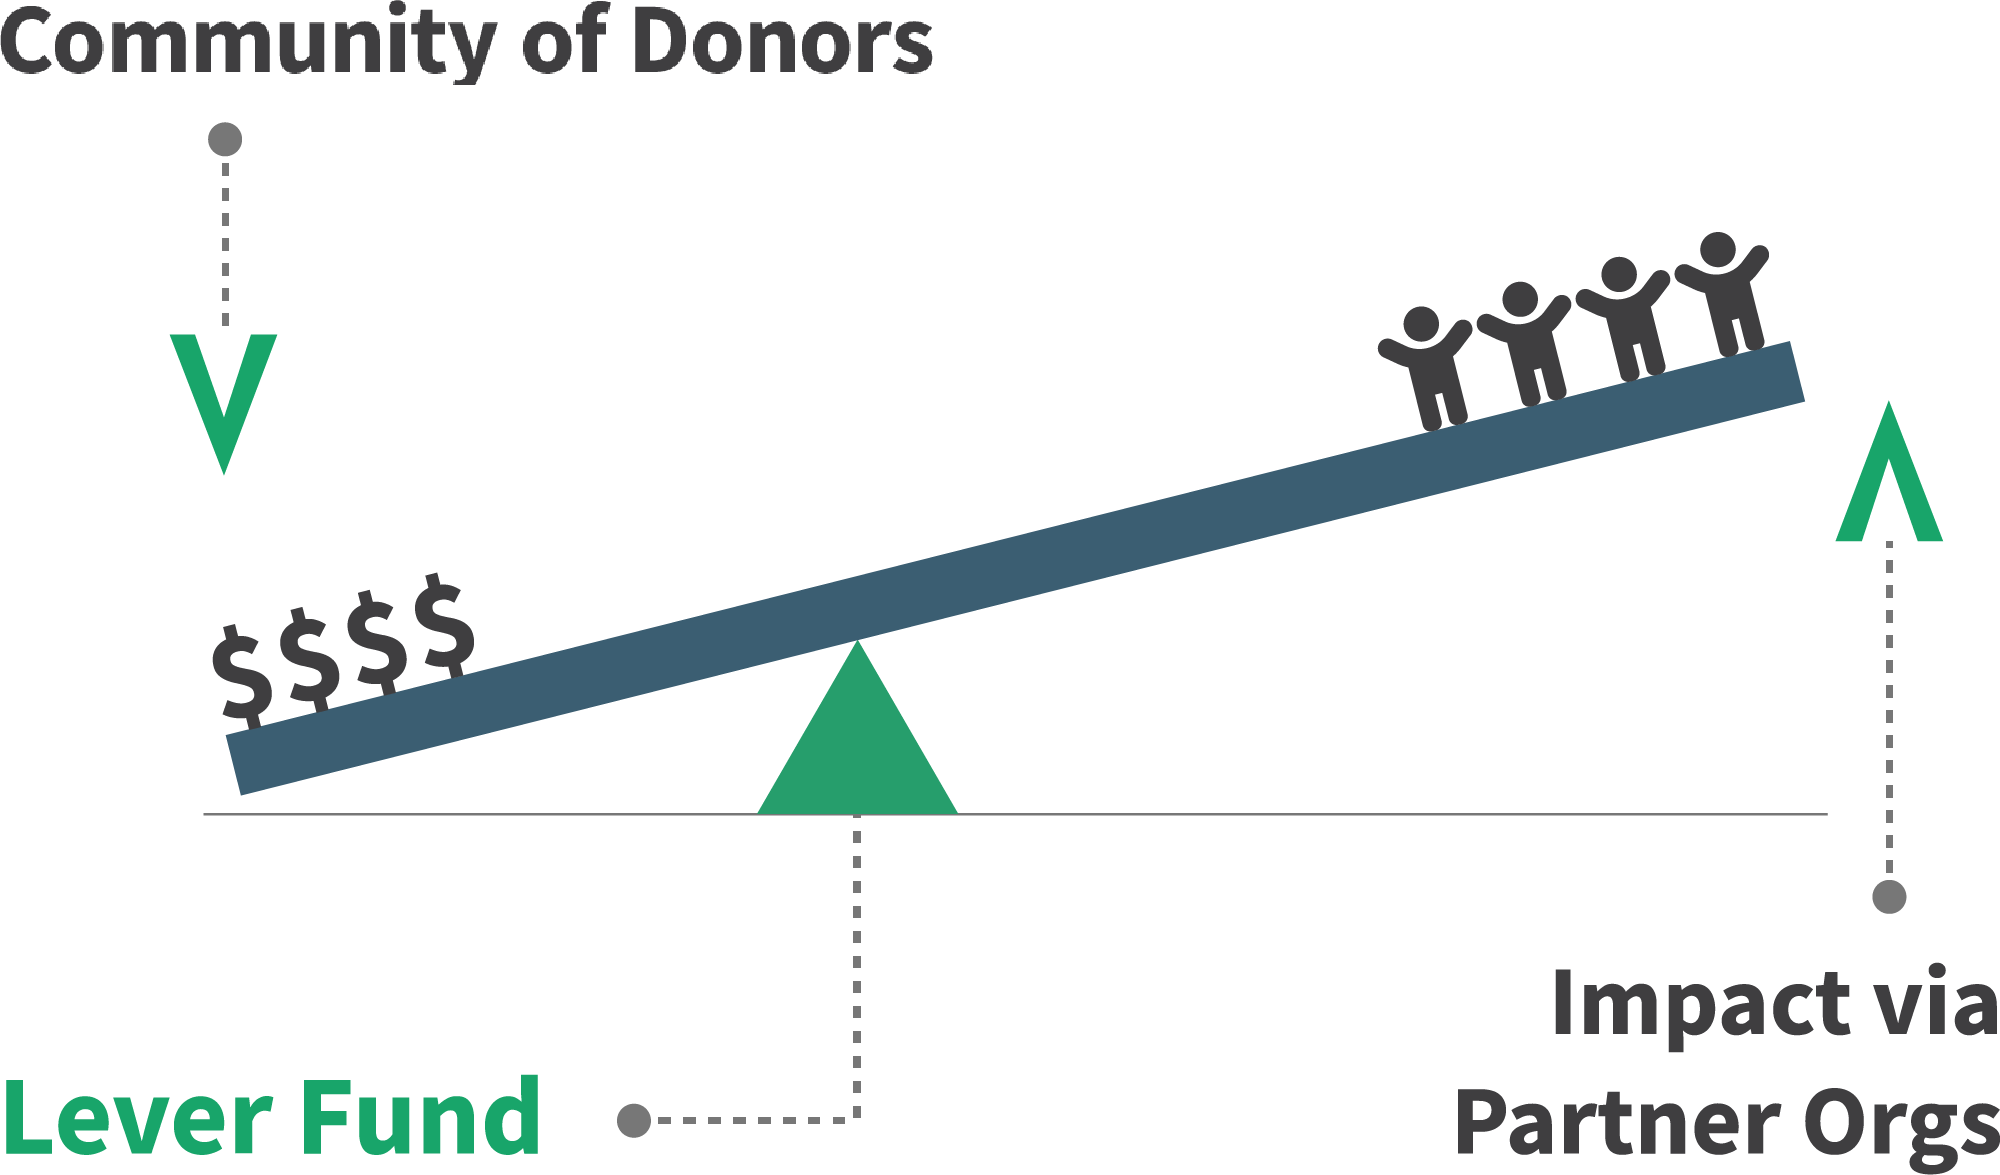 The impact of a community of donors via a partner organization and Lever Fund - stage 3